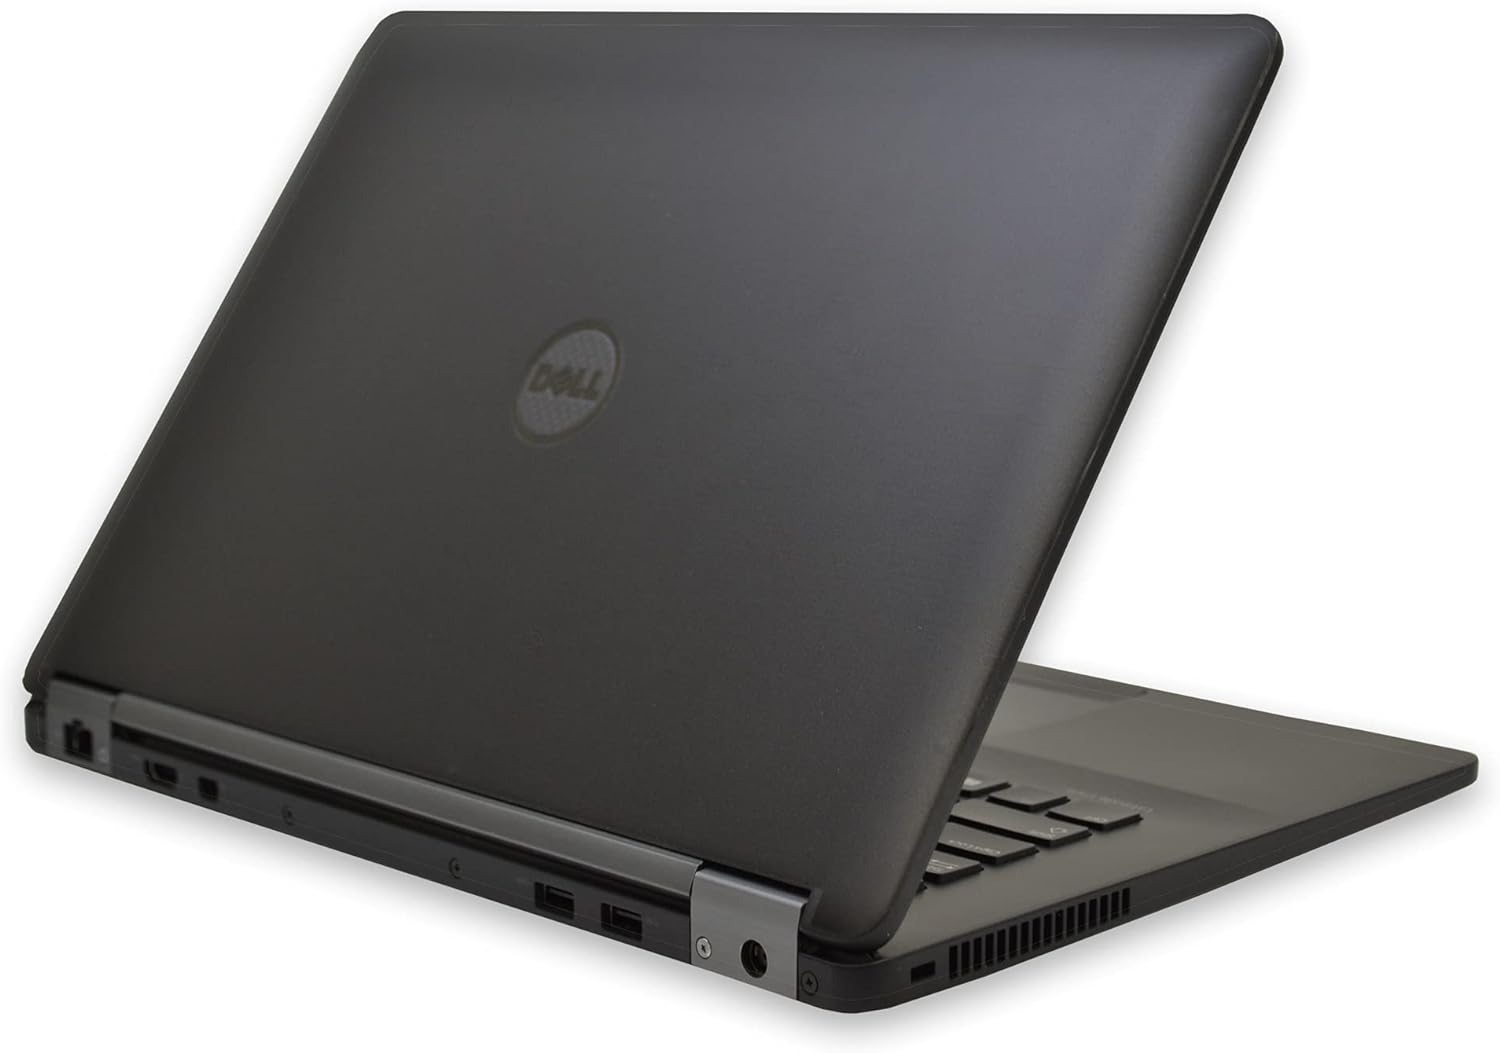 Refurbished Dell Laitude E7450 Laptop Intel Core i5, 8GB Ram, 128GB Solid State, Windows 10 Operating System